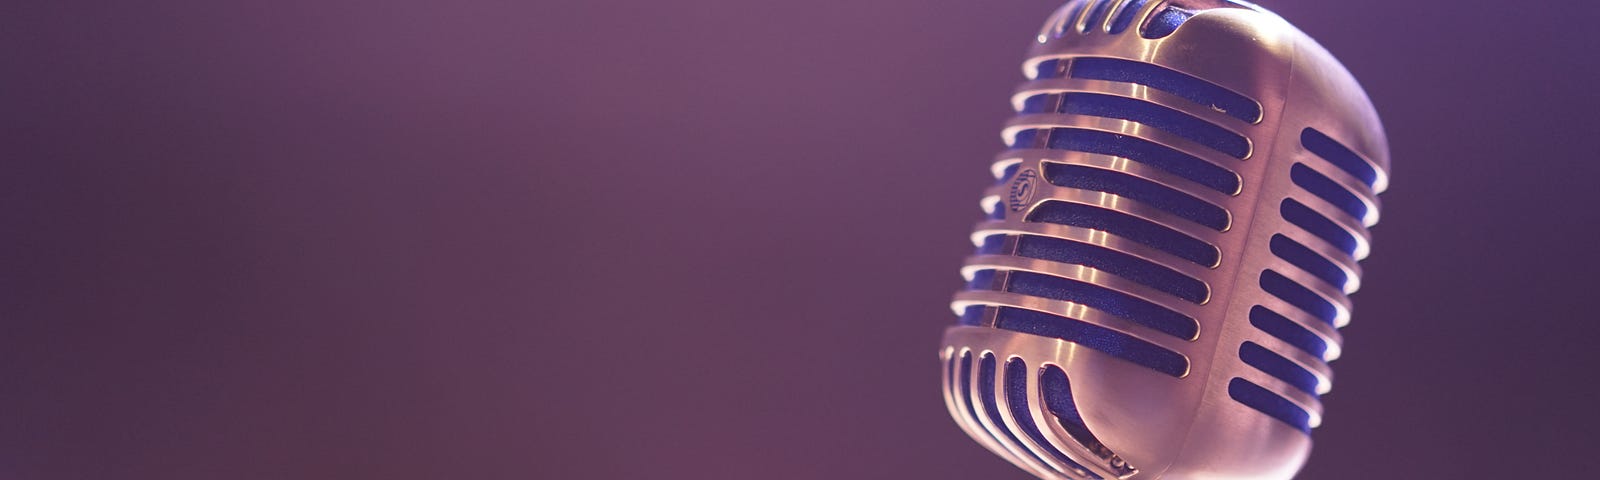 photo of an old-style microphone with silver metal outer and open lines in the structure of the device. The background is dark and blurry, with a clearly lit blurry spotlight shining where the mic is placed.